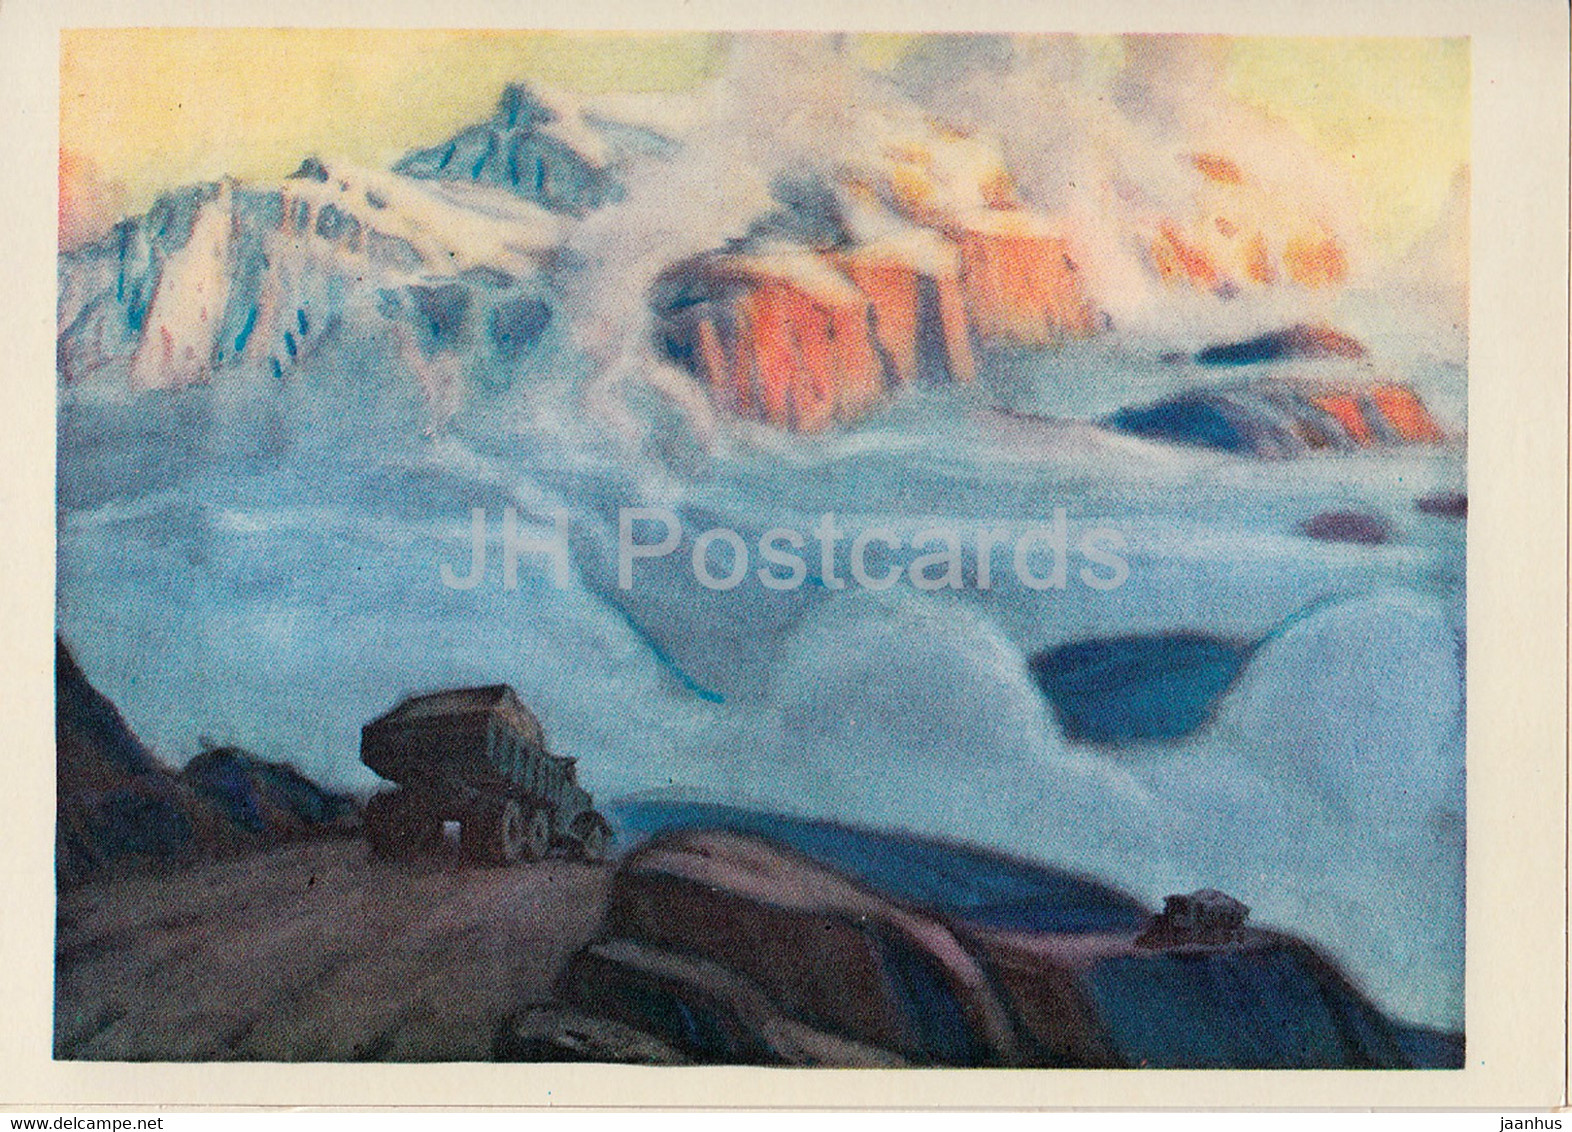 Across Kyrgyzstan By V. Rogachev - On The Road To Chetkal Valley - Illustration - 1979 - Russia USSR - Unused - Kyrgyzstan